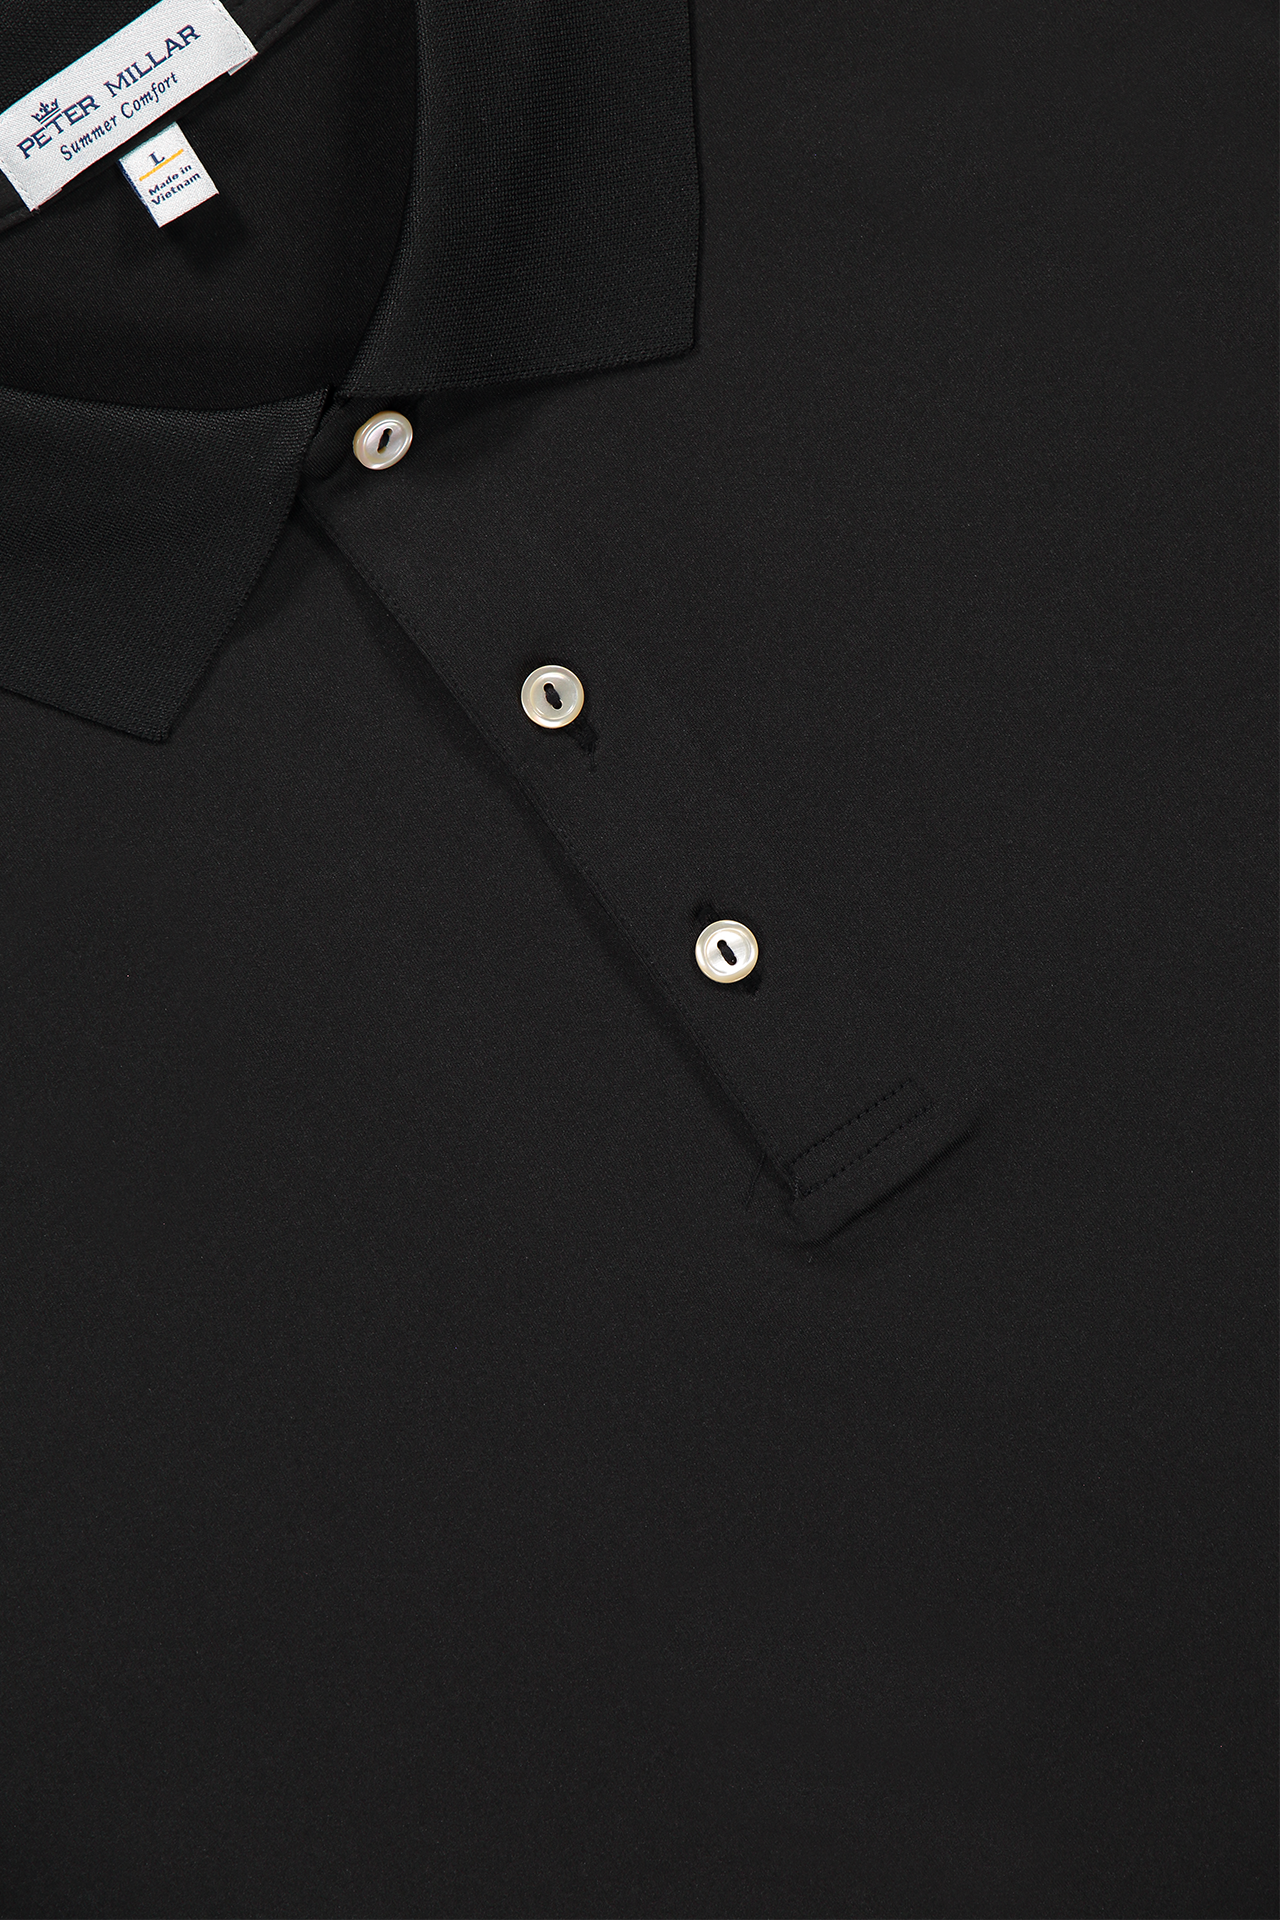 Peter Millar Solid Performance Jersey Polo in Black - Collar Detail Image  (6606330462323)